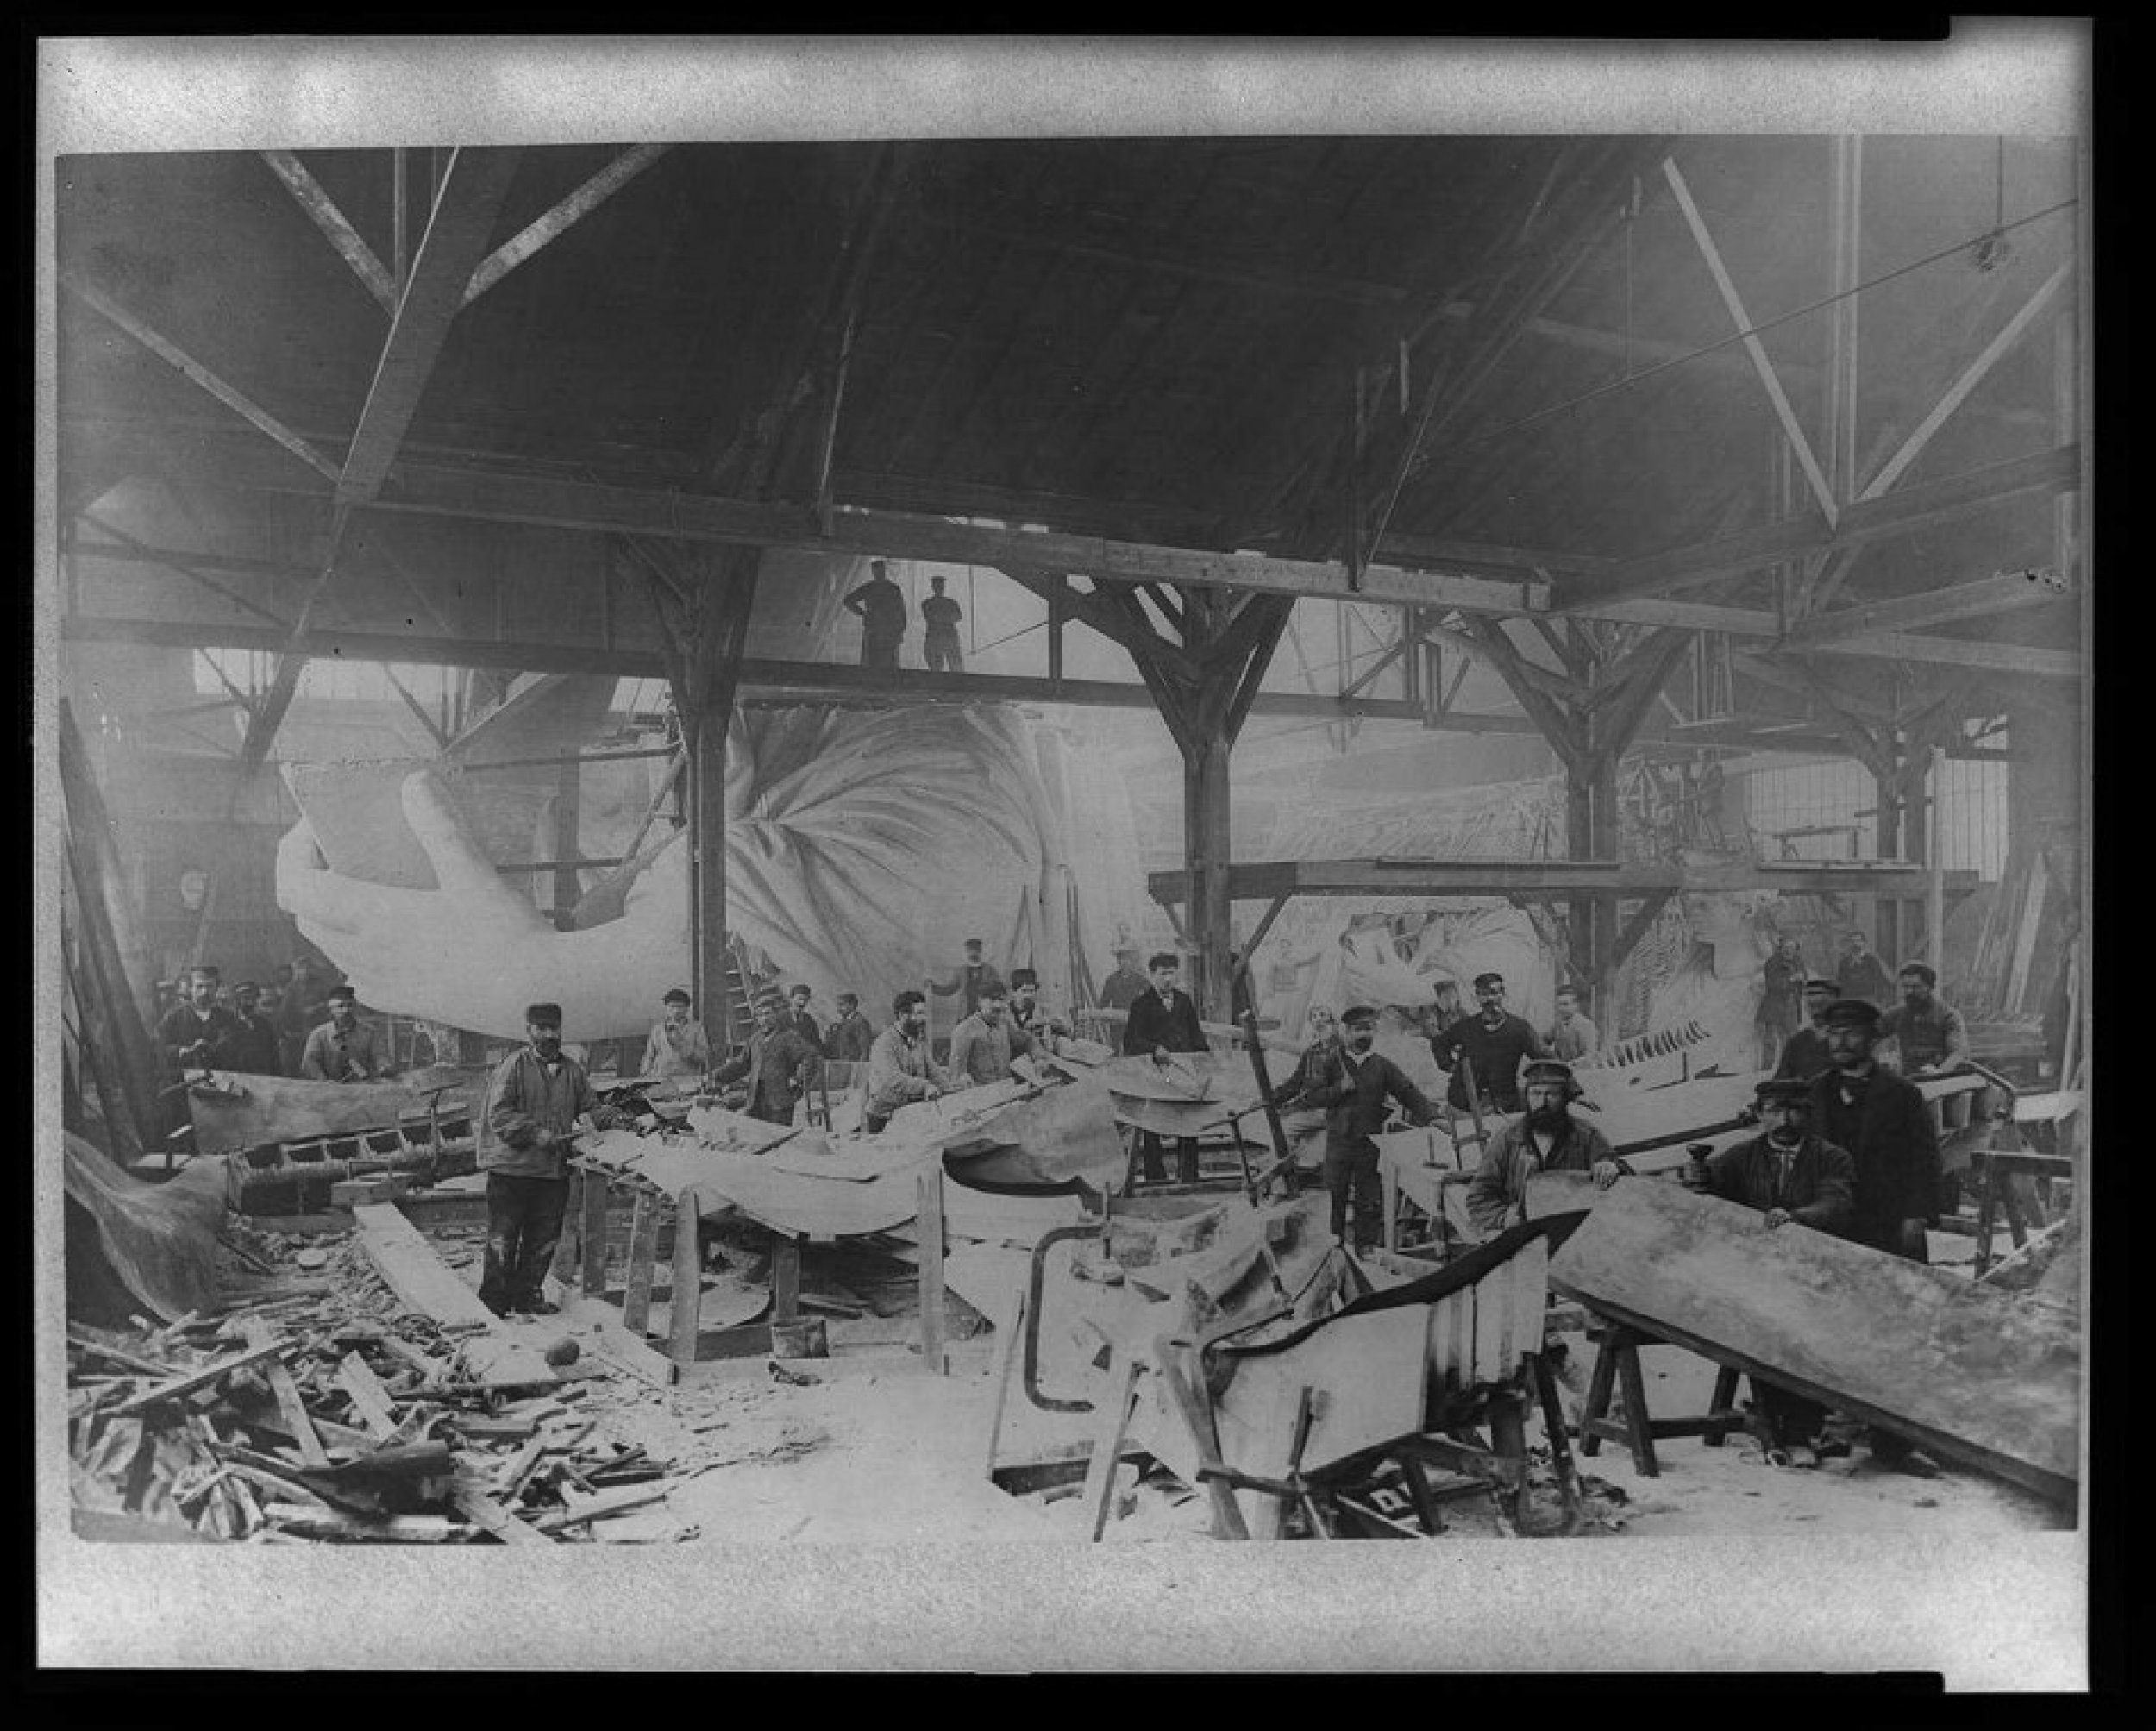 Workmen constructing the Statue of Liberty in Bartholdis Parisian warehouse workshop first model left hand and quarter-size head--Winter 1882